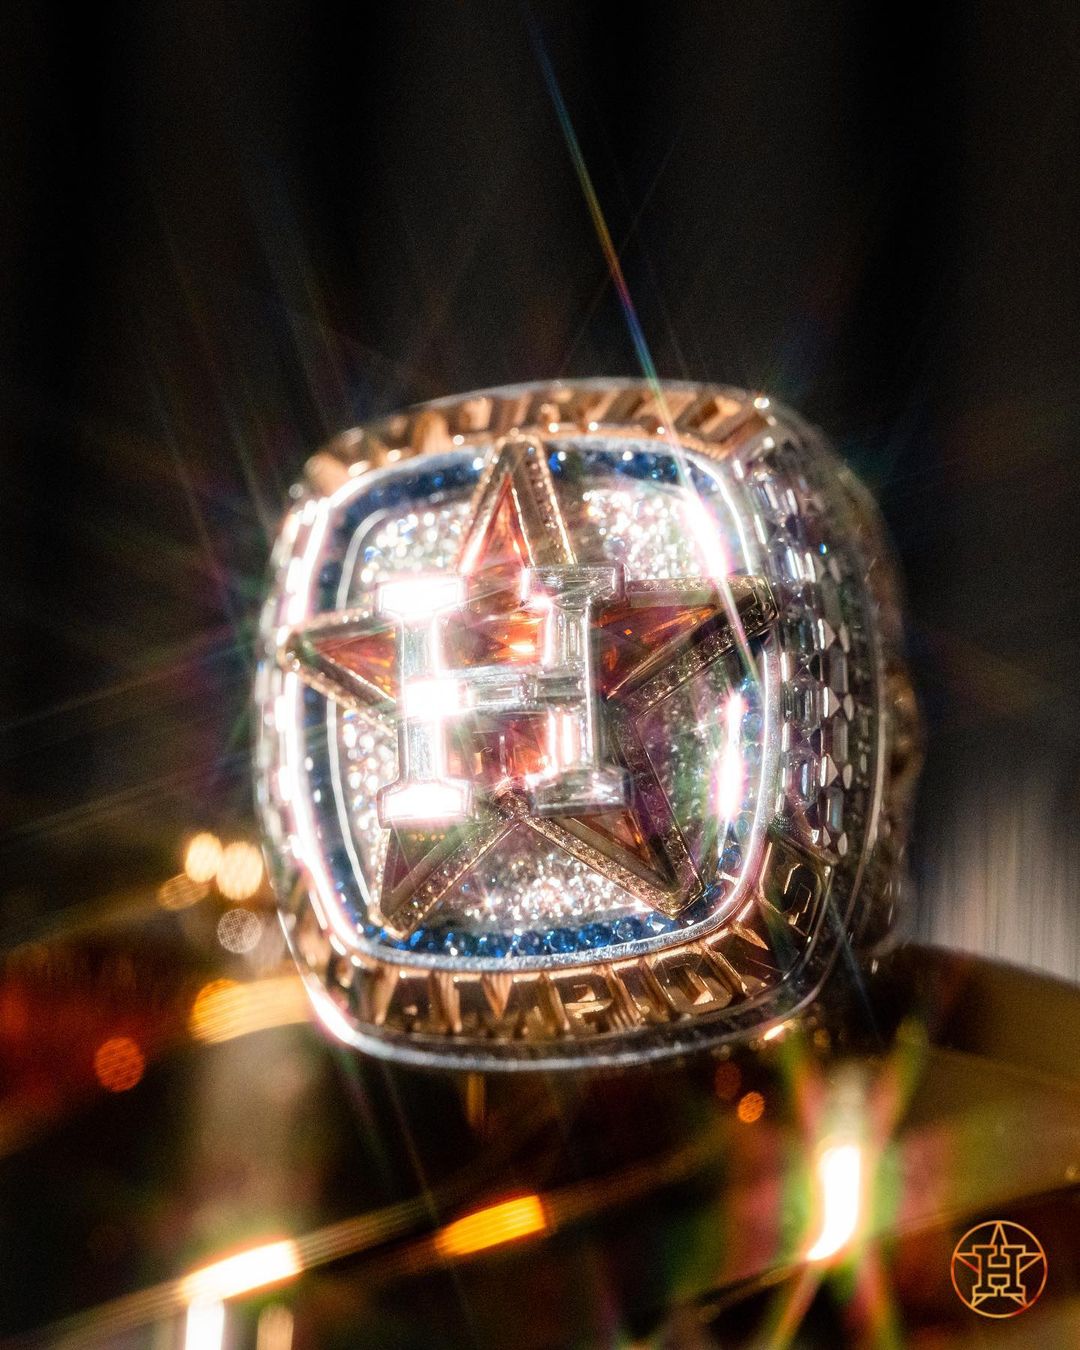 An Inside Look At the Houston Astros' World Series Championship